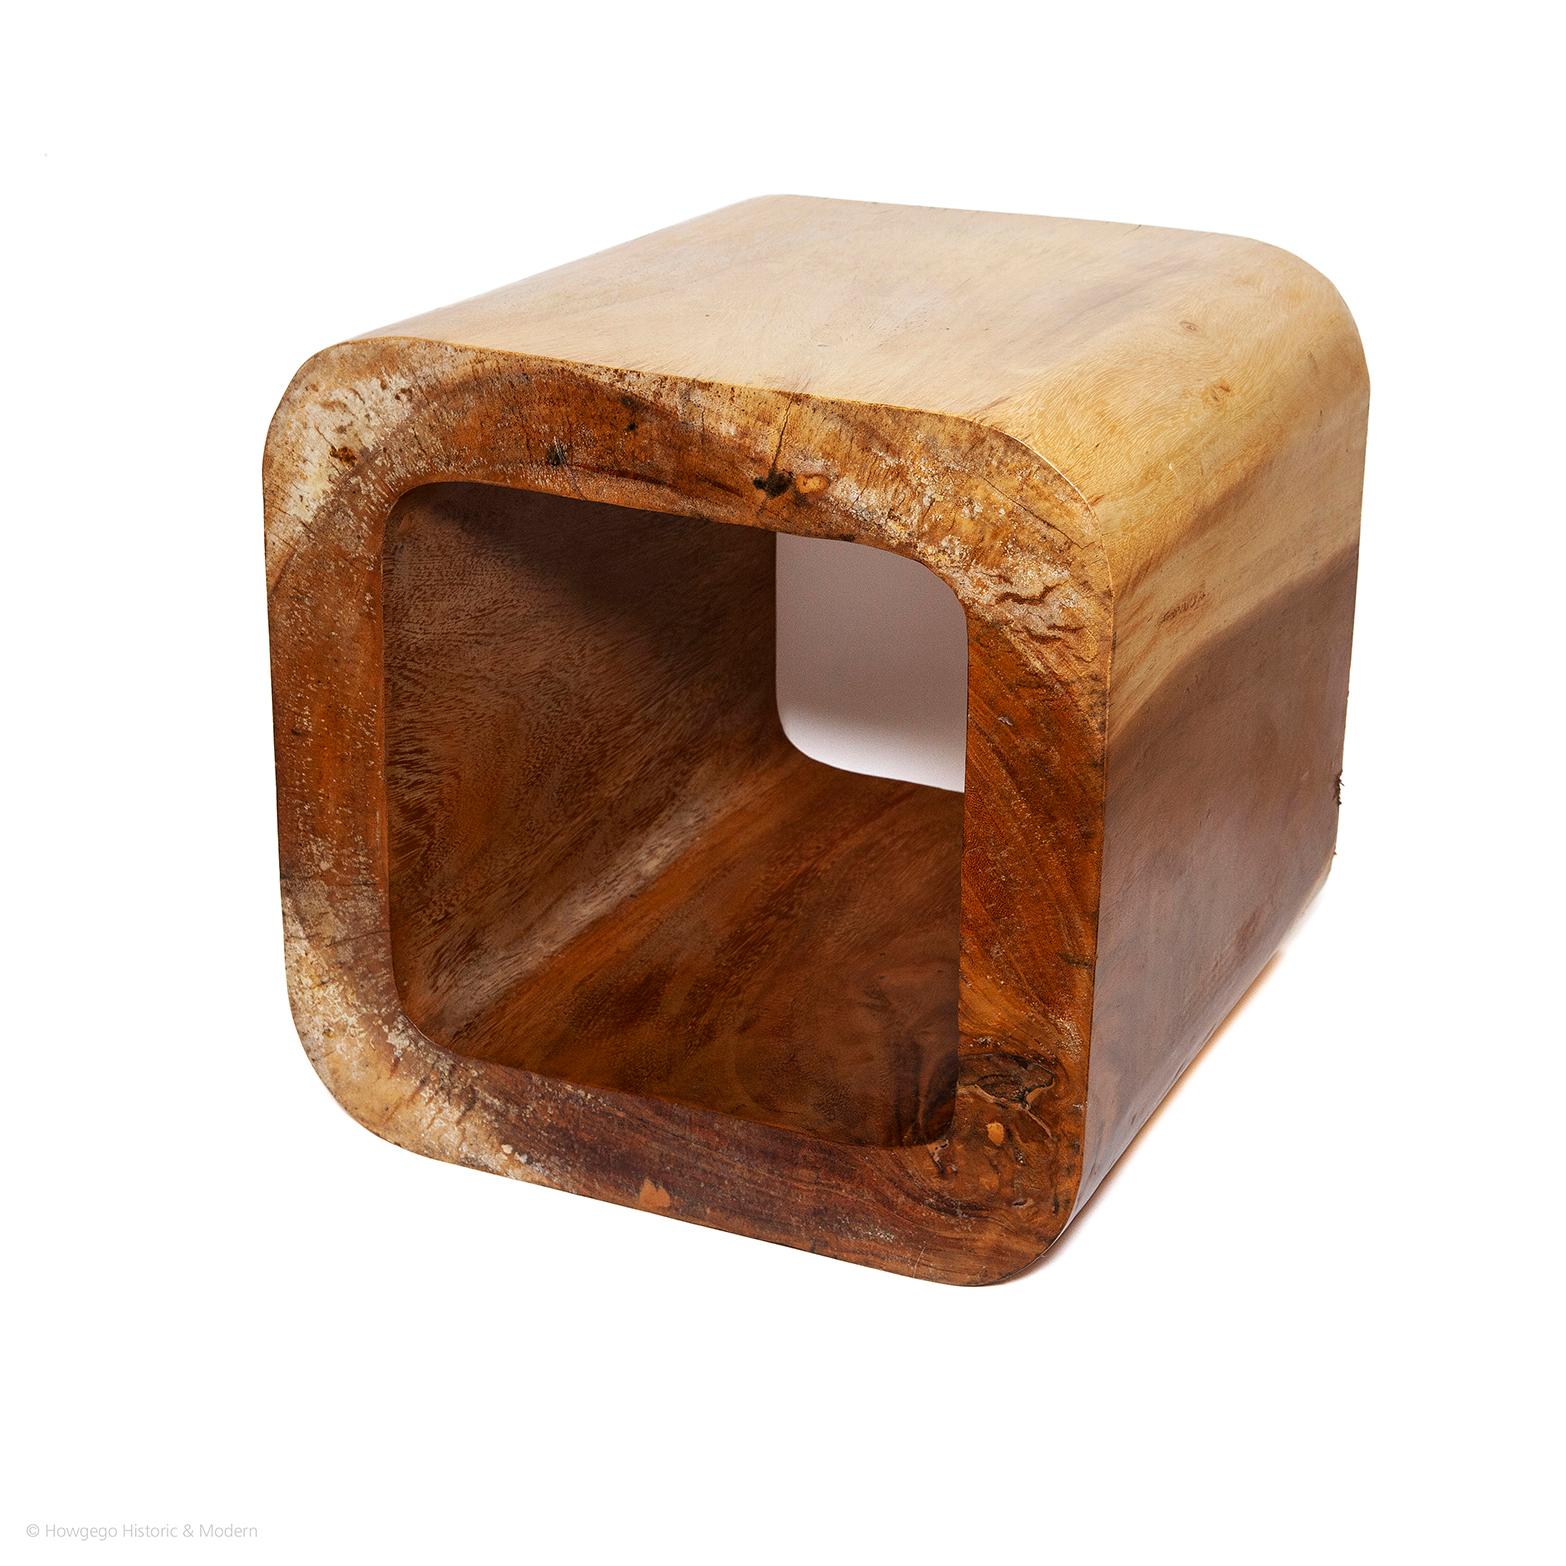 - Striking and tactile 1960s open cube table or stool injecting atmosphere into the modern or contemporary interior
- Made from an exotic wood with natural and original two-tone pale and rich honey color and surface creating juxtaposition in the